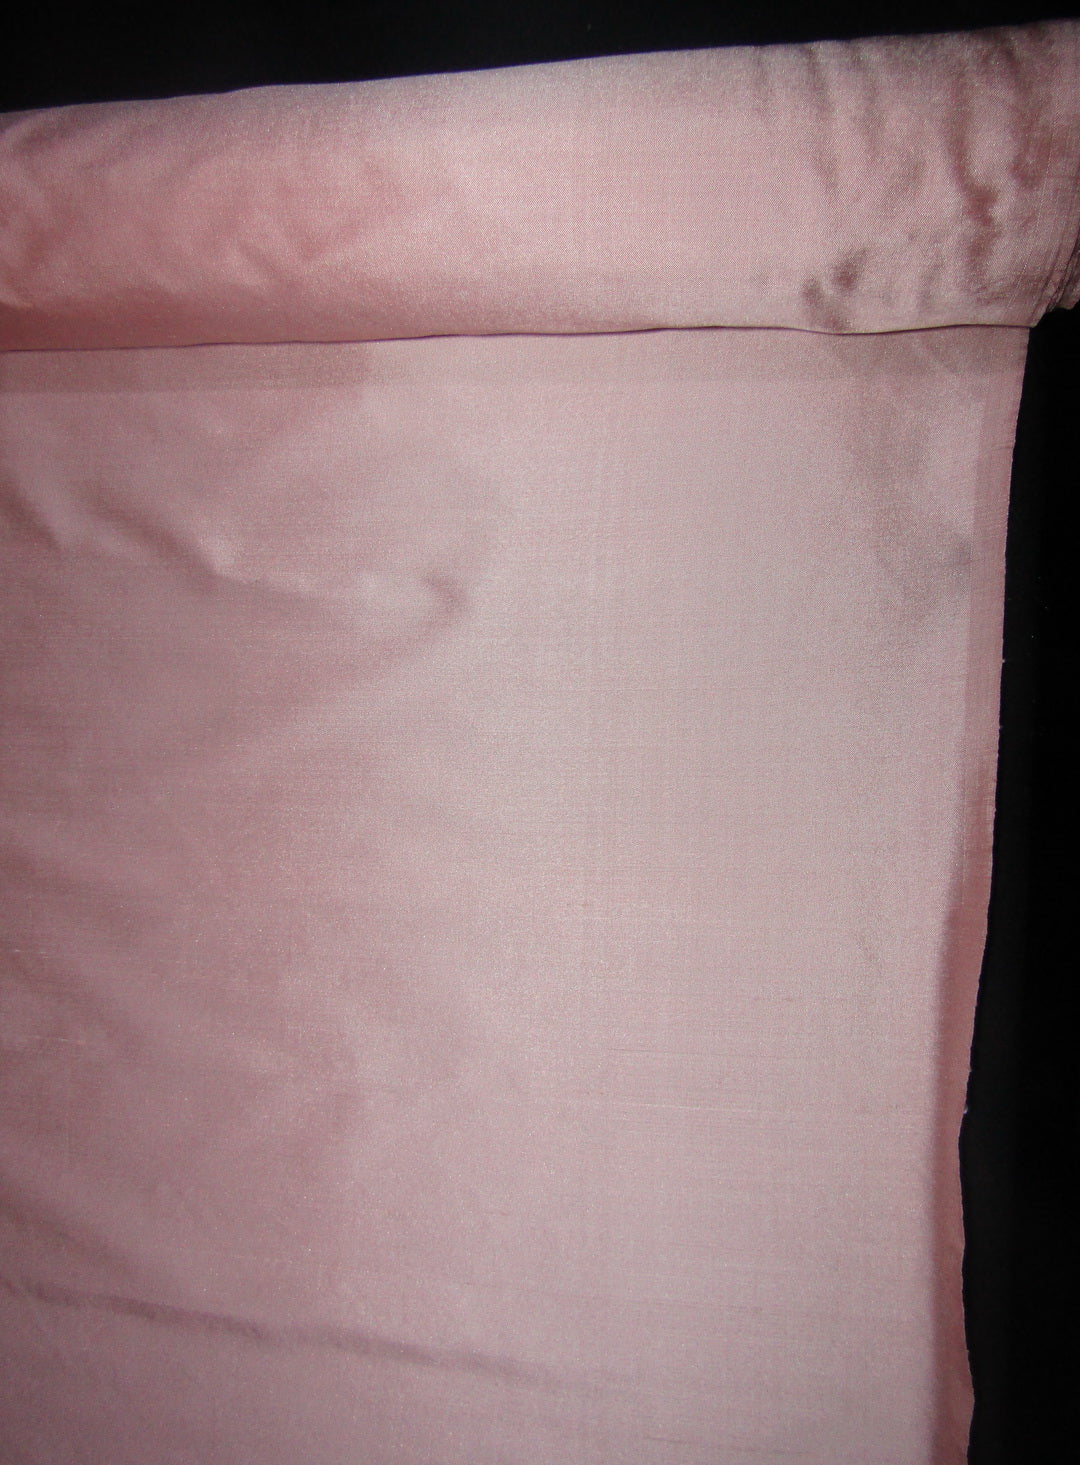 100% Pure silk dupion fabric dusty rose color 54" wide DUP312[2]